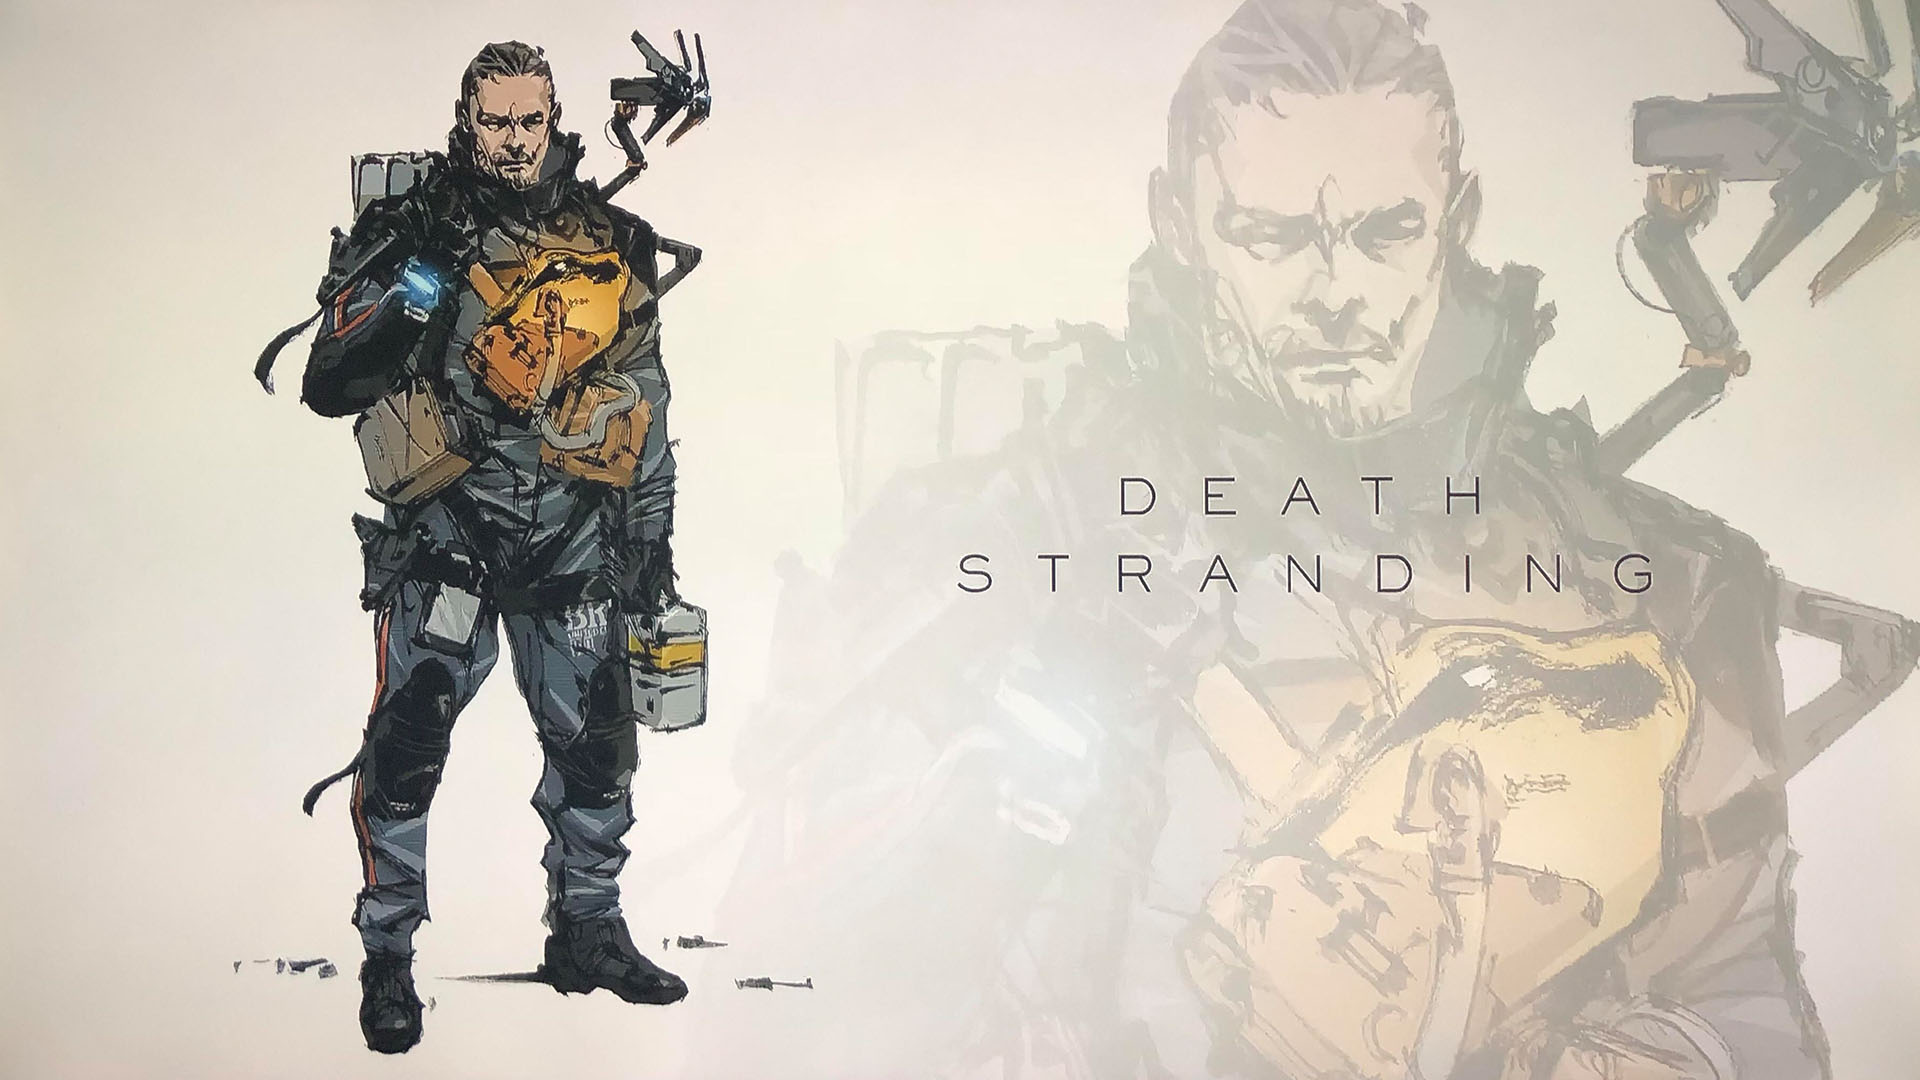 Death Stranding, PlayStation 4, US, North America, Europe, game, release date, trailer, screenshots, Tokyo Game Show 2018, update, Tokyo Game Show, TGS 2018, Japan, Asia, The Man in the Golden Mask, Troy Baker, new character artworks